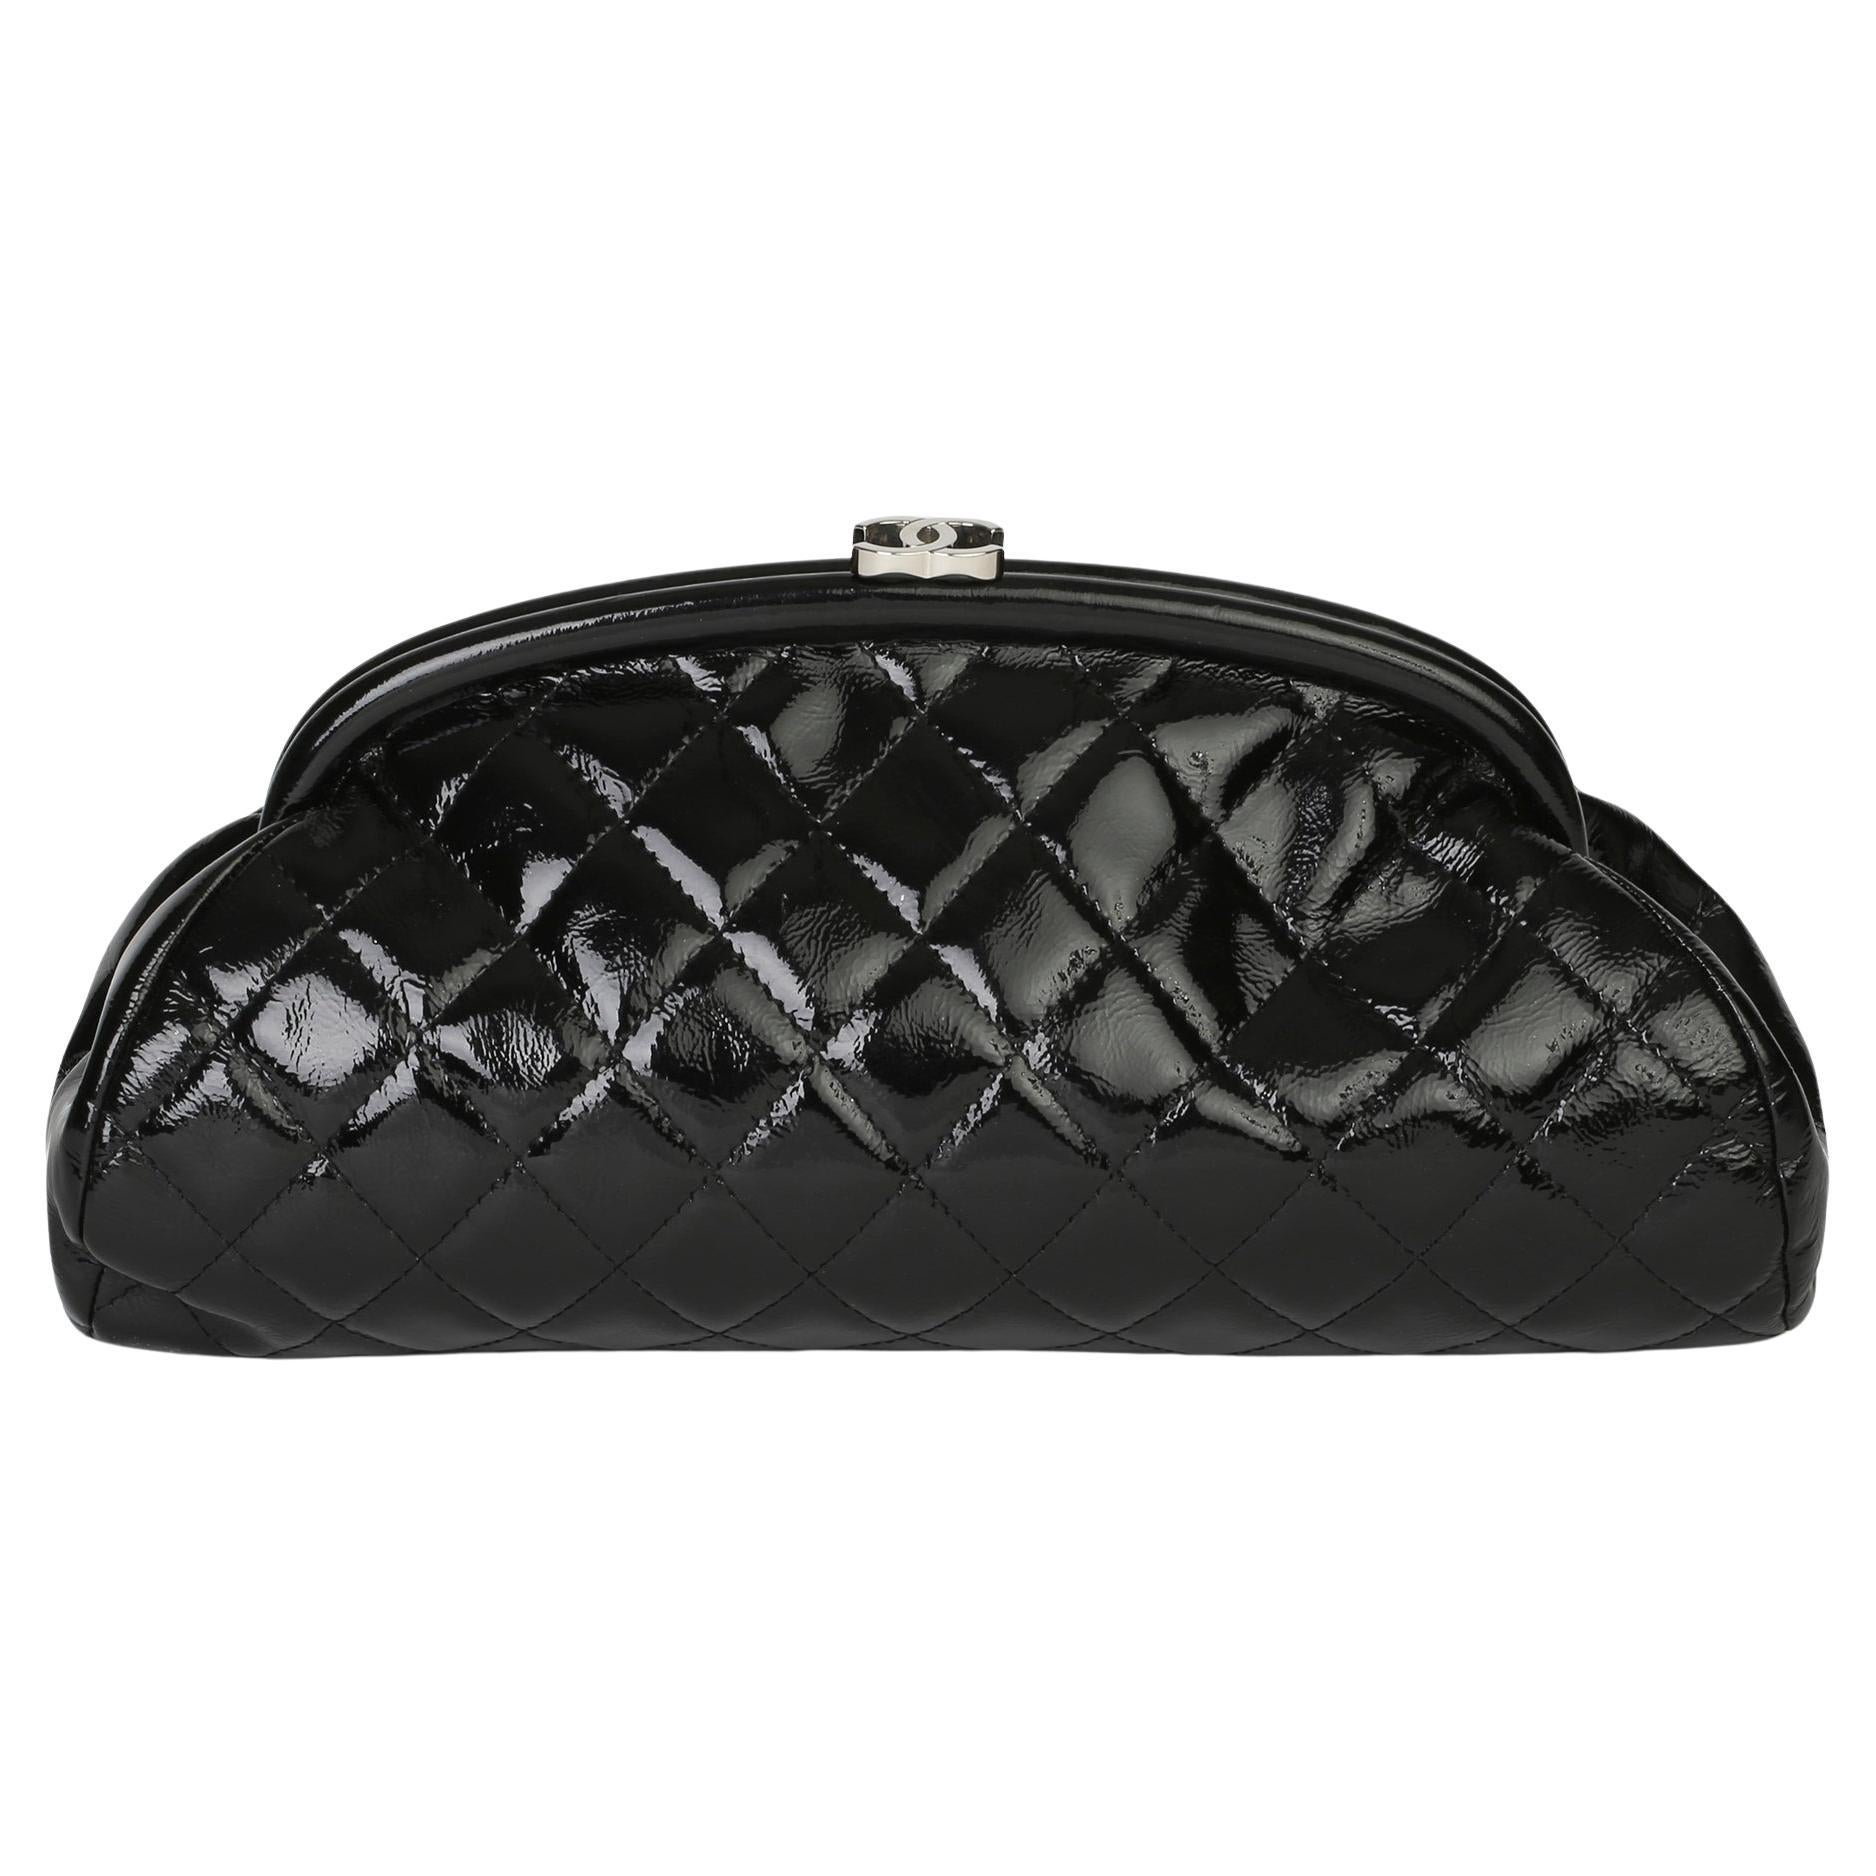 2007 Chanel Black Quilted Aged Patent Leather Timeless Clutch